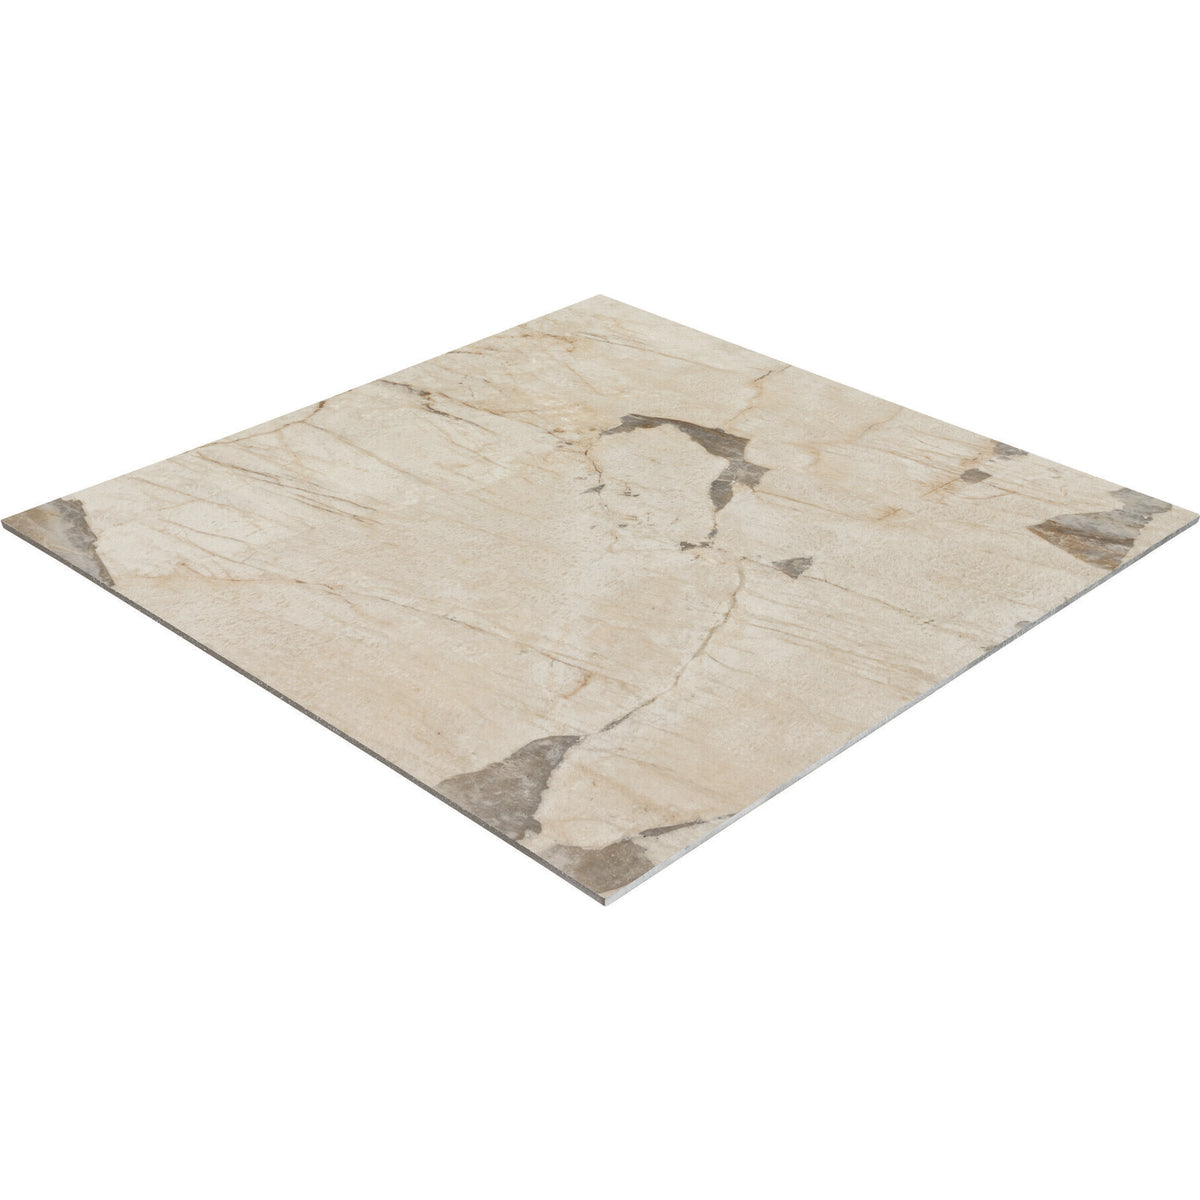 Marazzi - Savoir - 24 in. x 24 in. Colorbody Porcelain Tile - Pierre Matte Angled